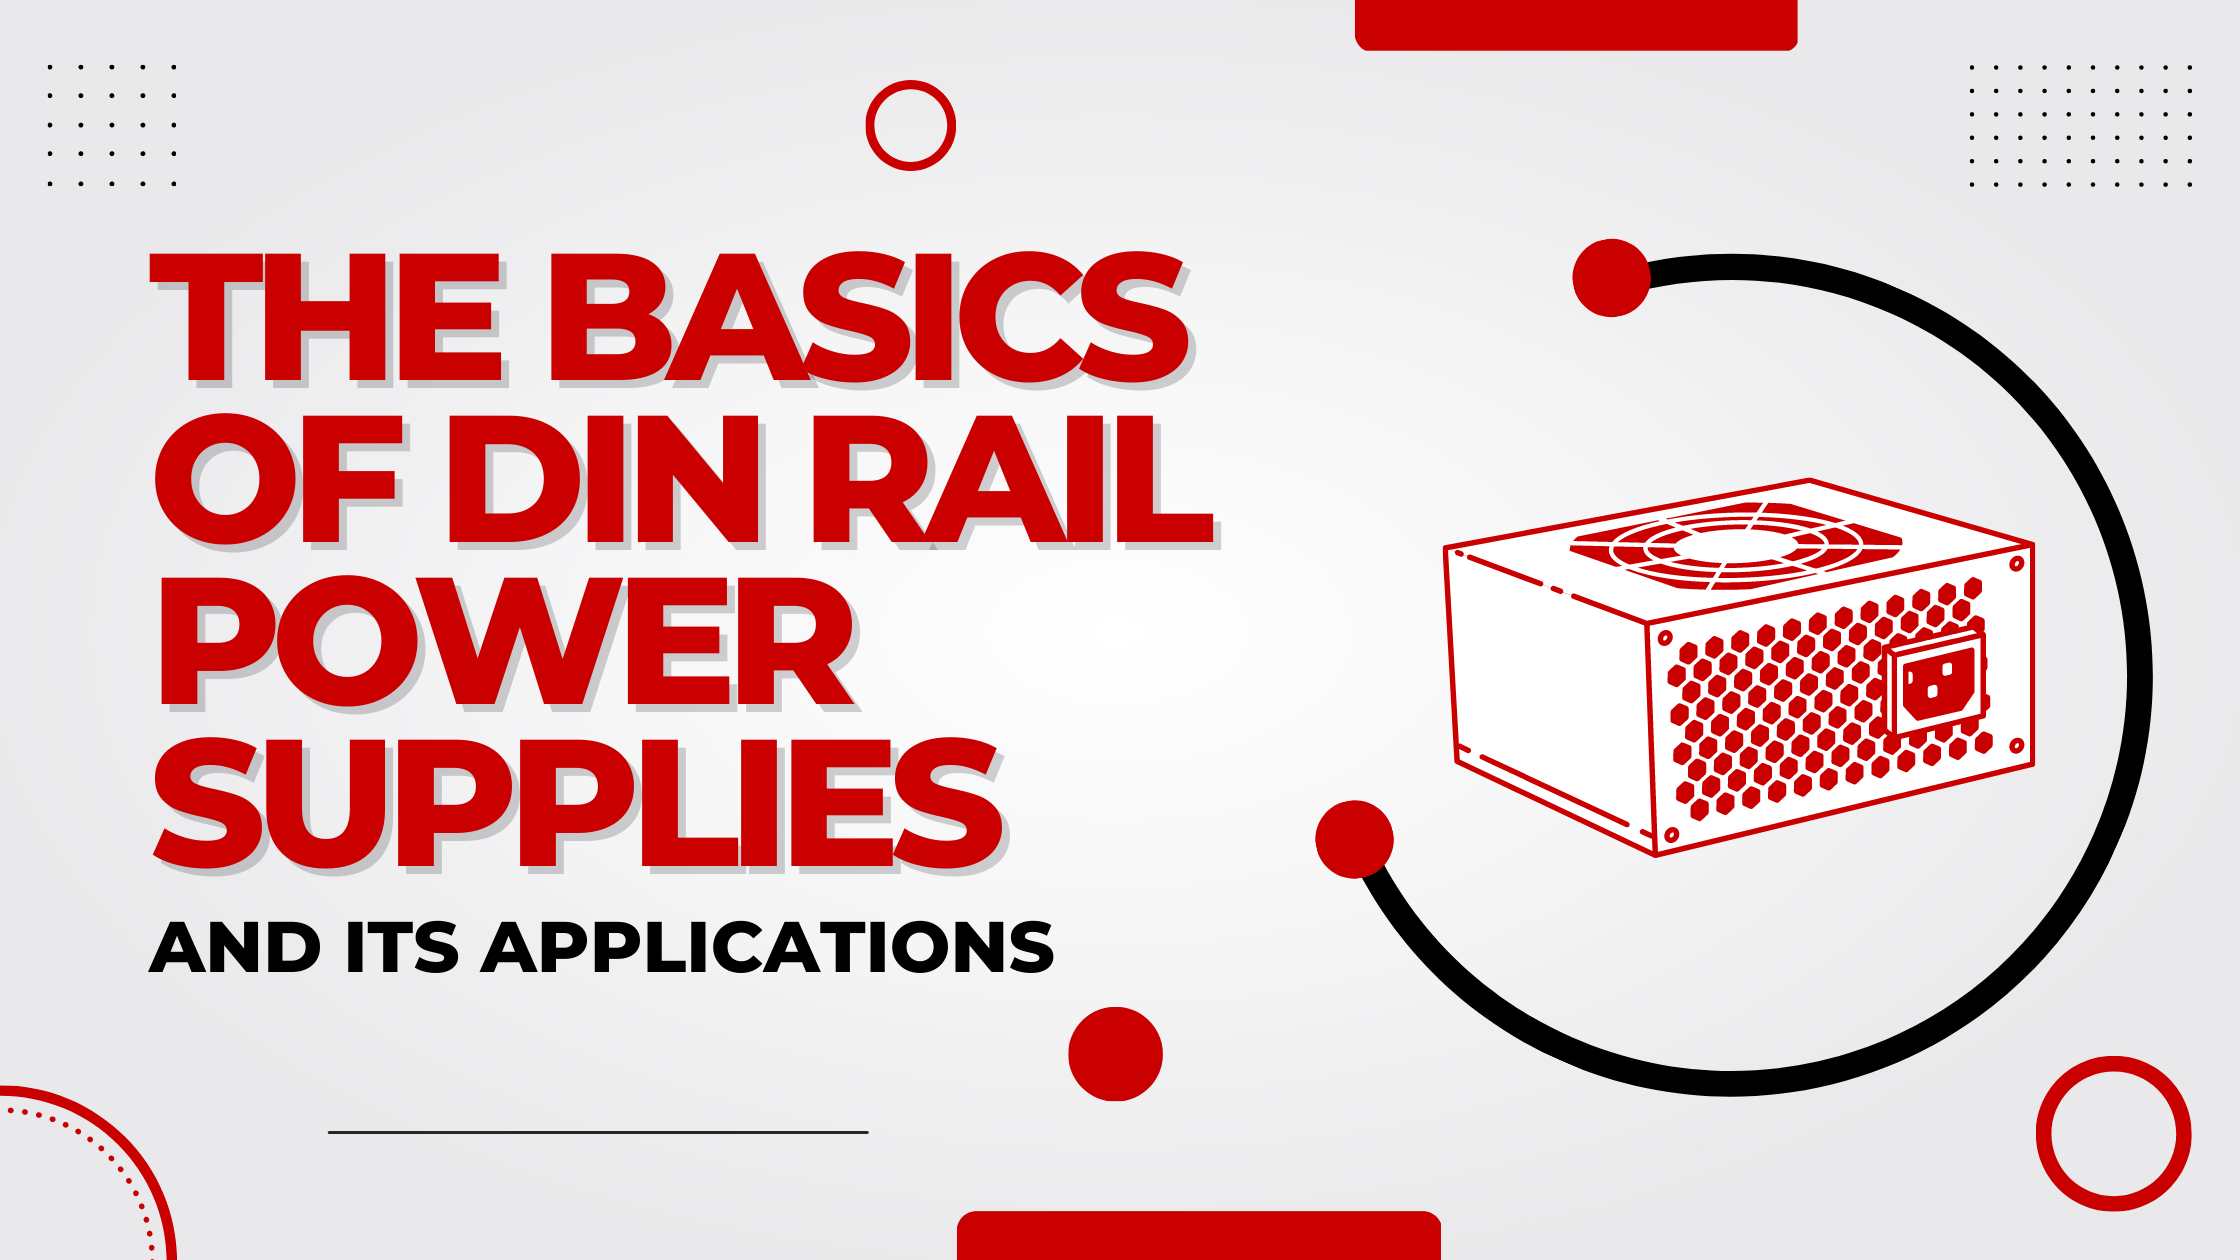 The basics of DIN rail power supplies and its applications